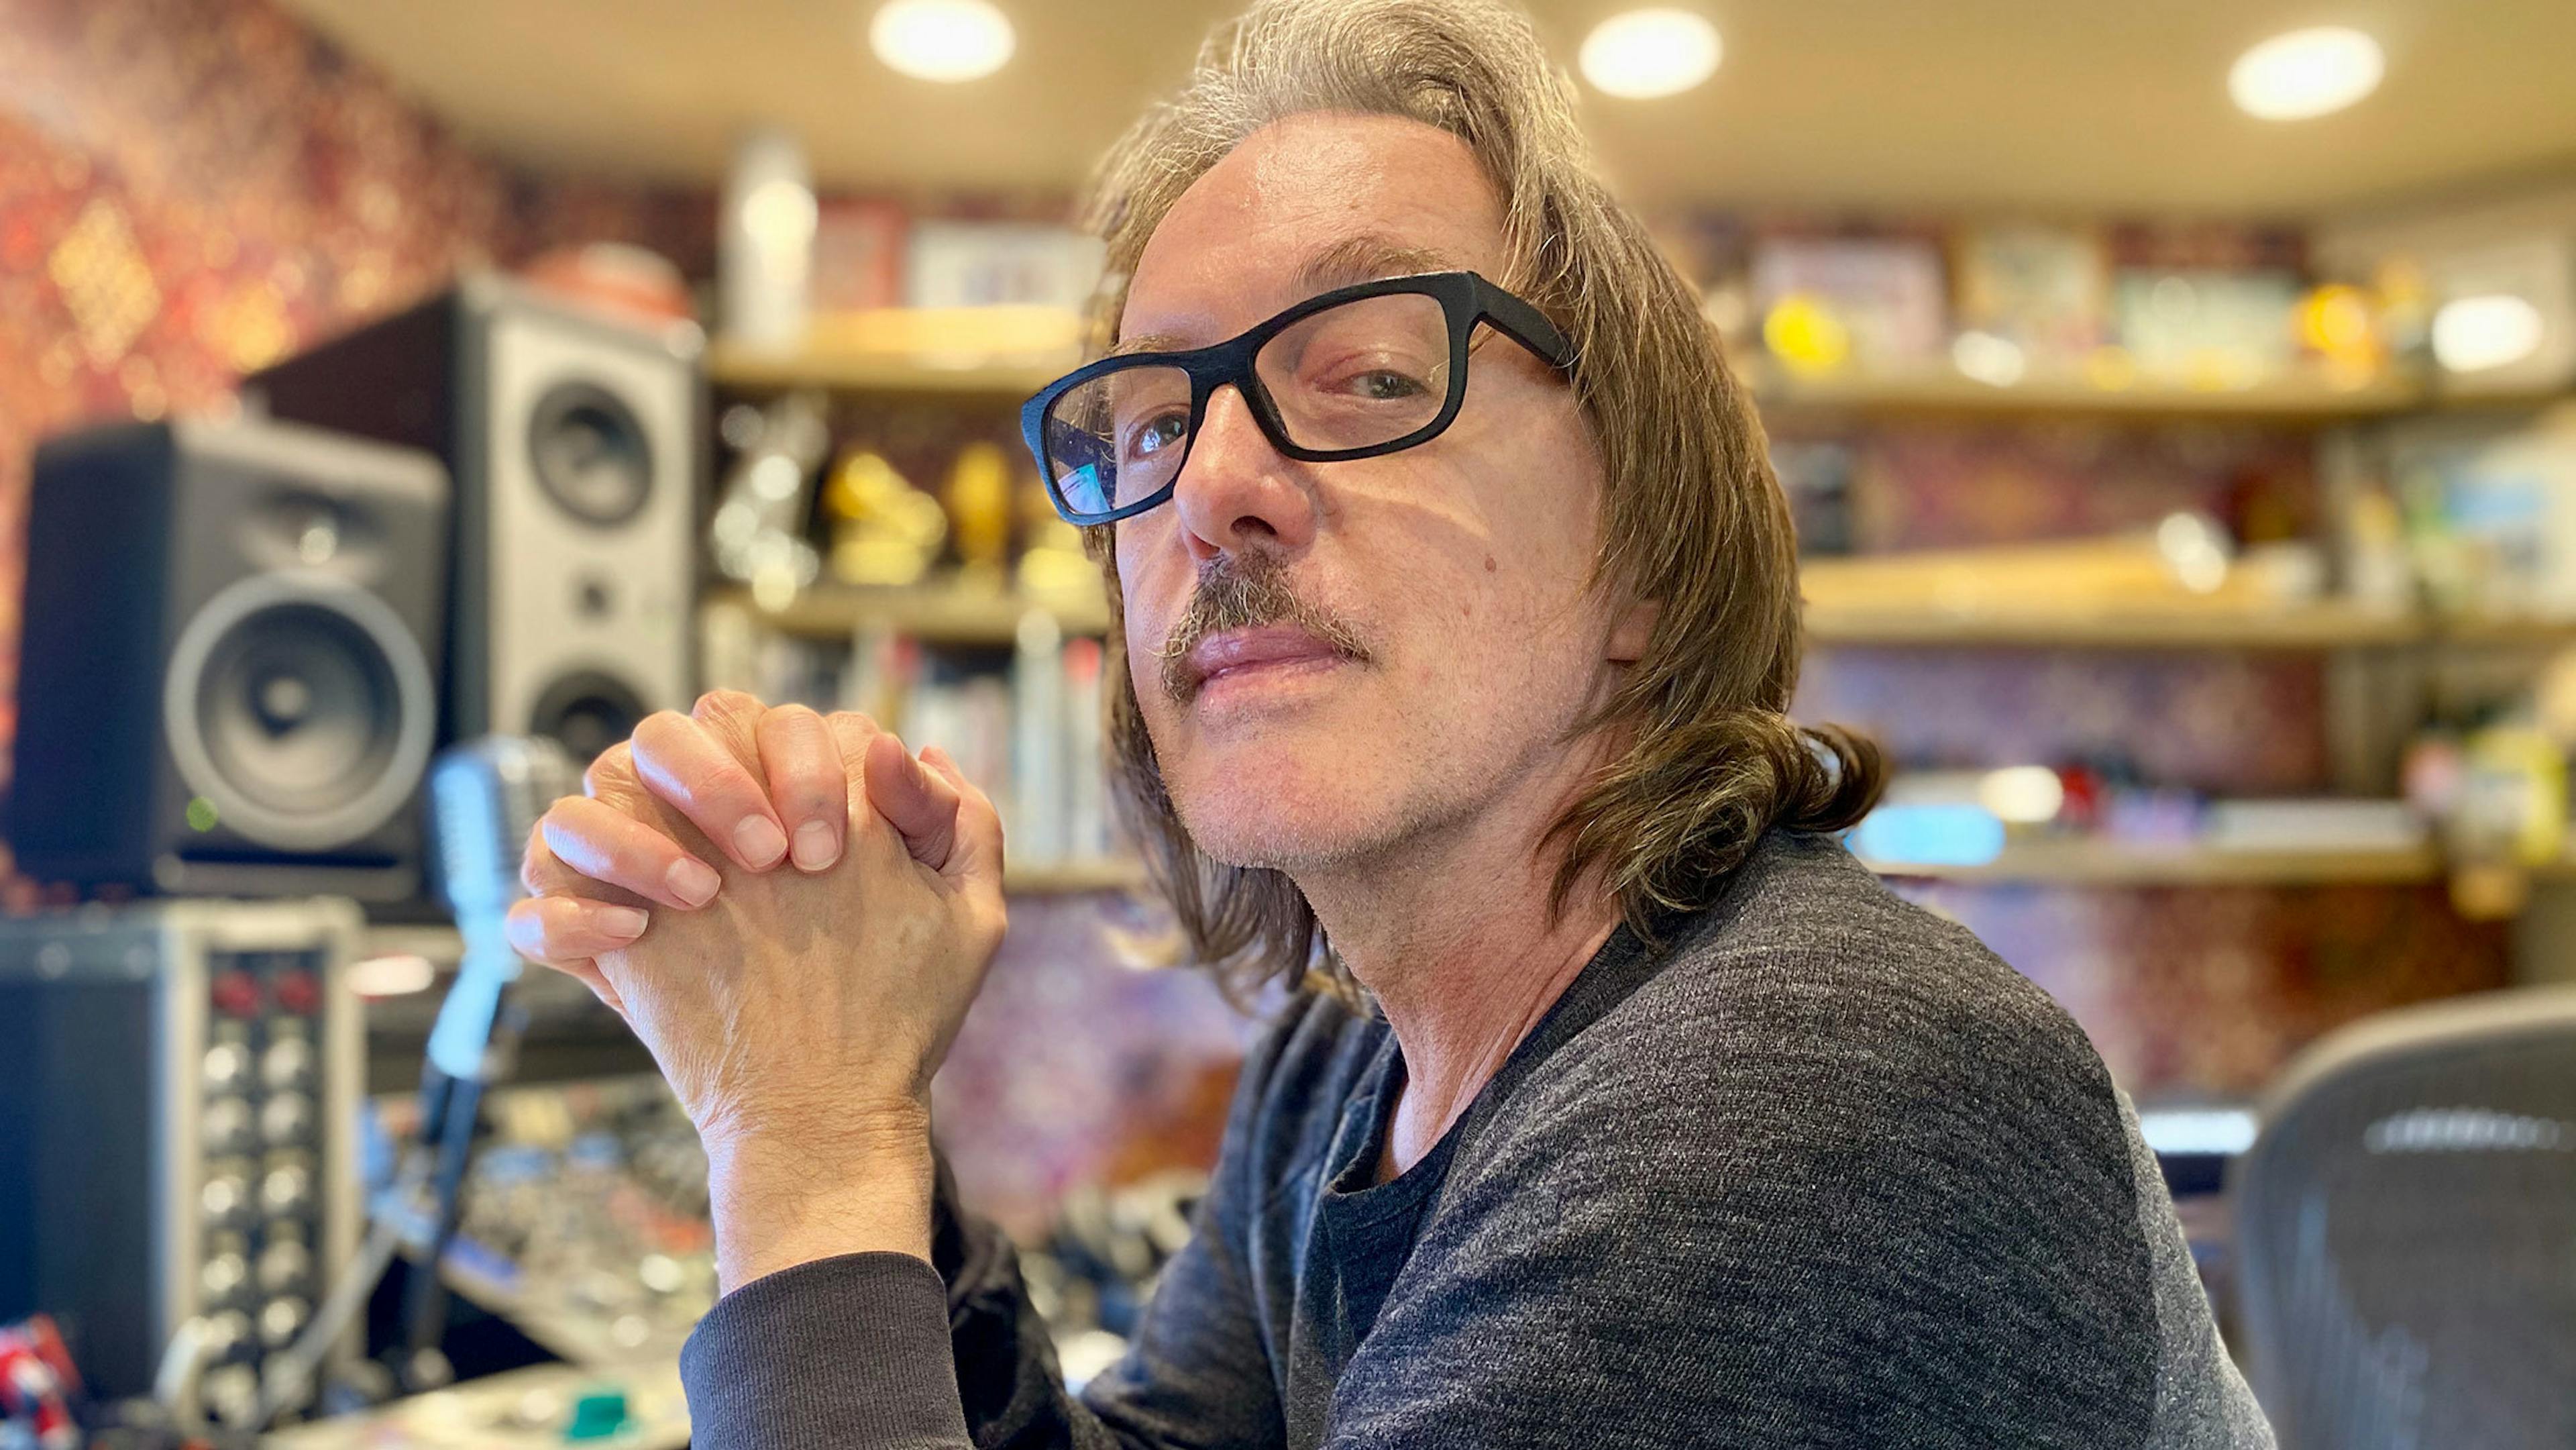 Butch Vig: “I looked at bands like The Beatles and Led Zeppelin as these untouchable rock gods… But when punk came out, I thought, ‘I could do that’”